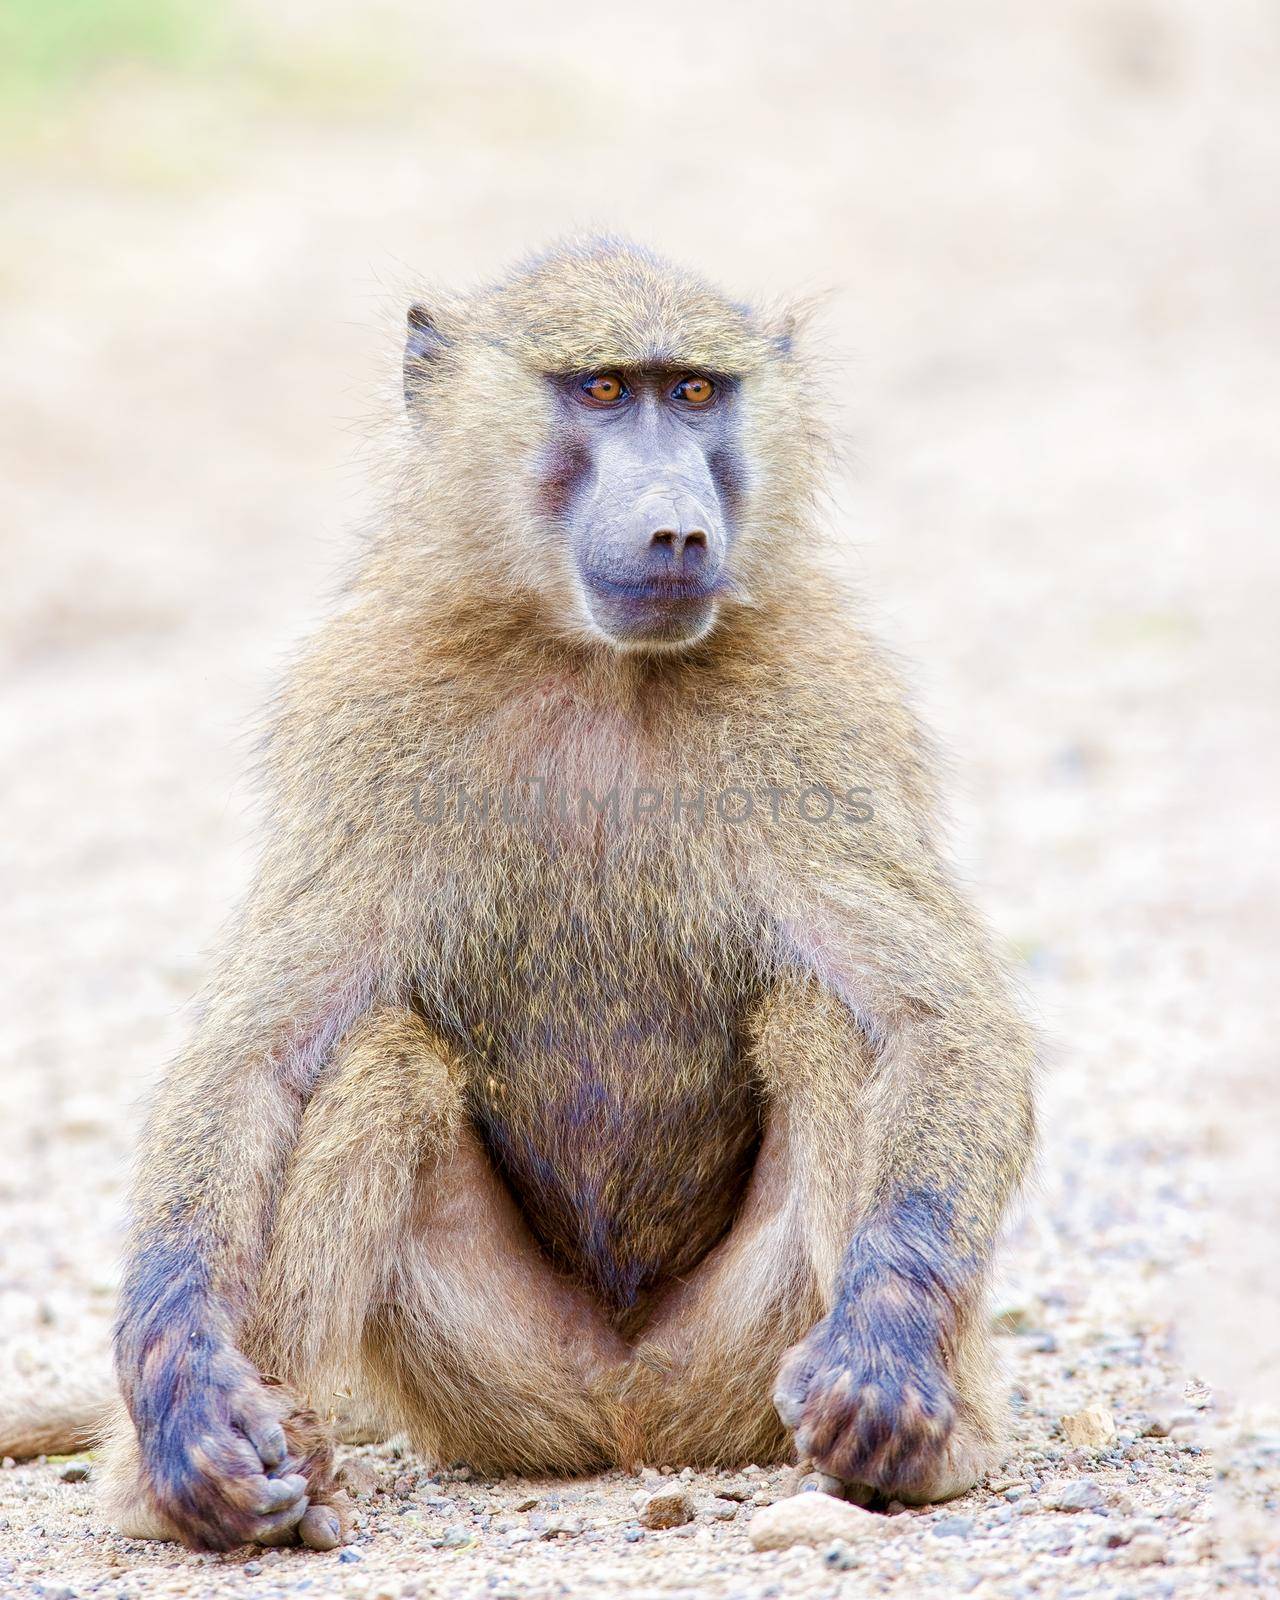 A baboon monkey is sitting on the sand and looking somewhere off into the distance. Kenya, a national park, wildlife.